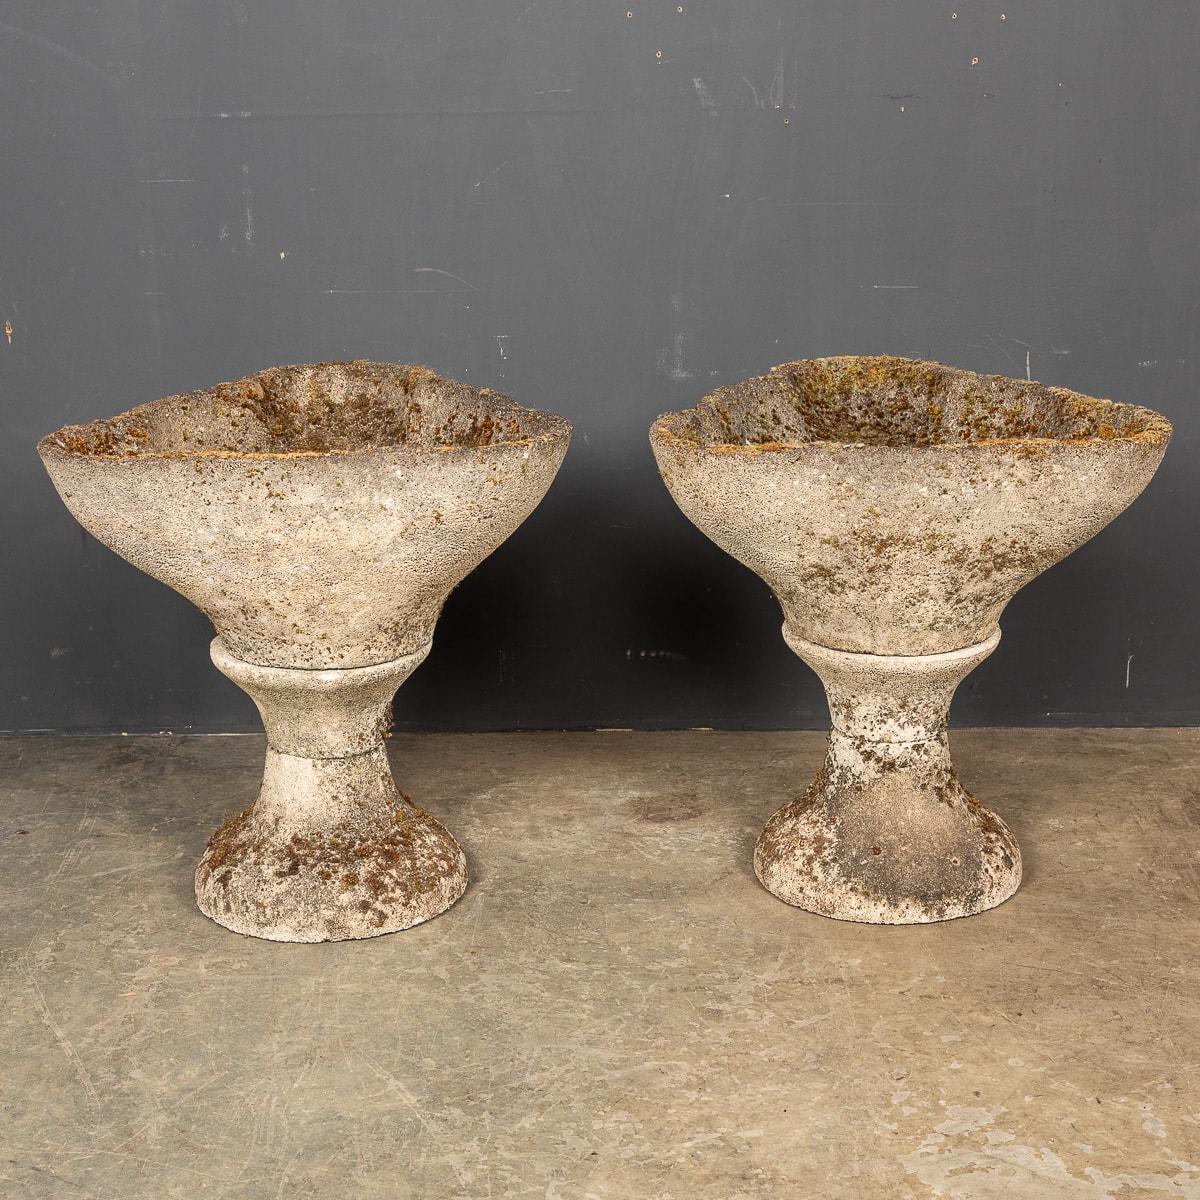 A large pair of stone garden urns in a scalloped bowl shape. This pair have a natural patina and look amazing with or without plants. These urns are in good condition, their age only contributing to their inherent character and allure.

We offer